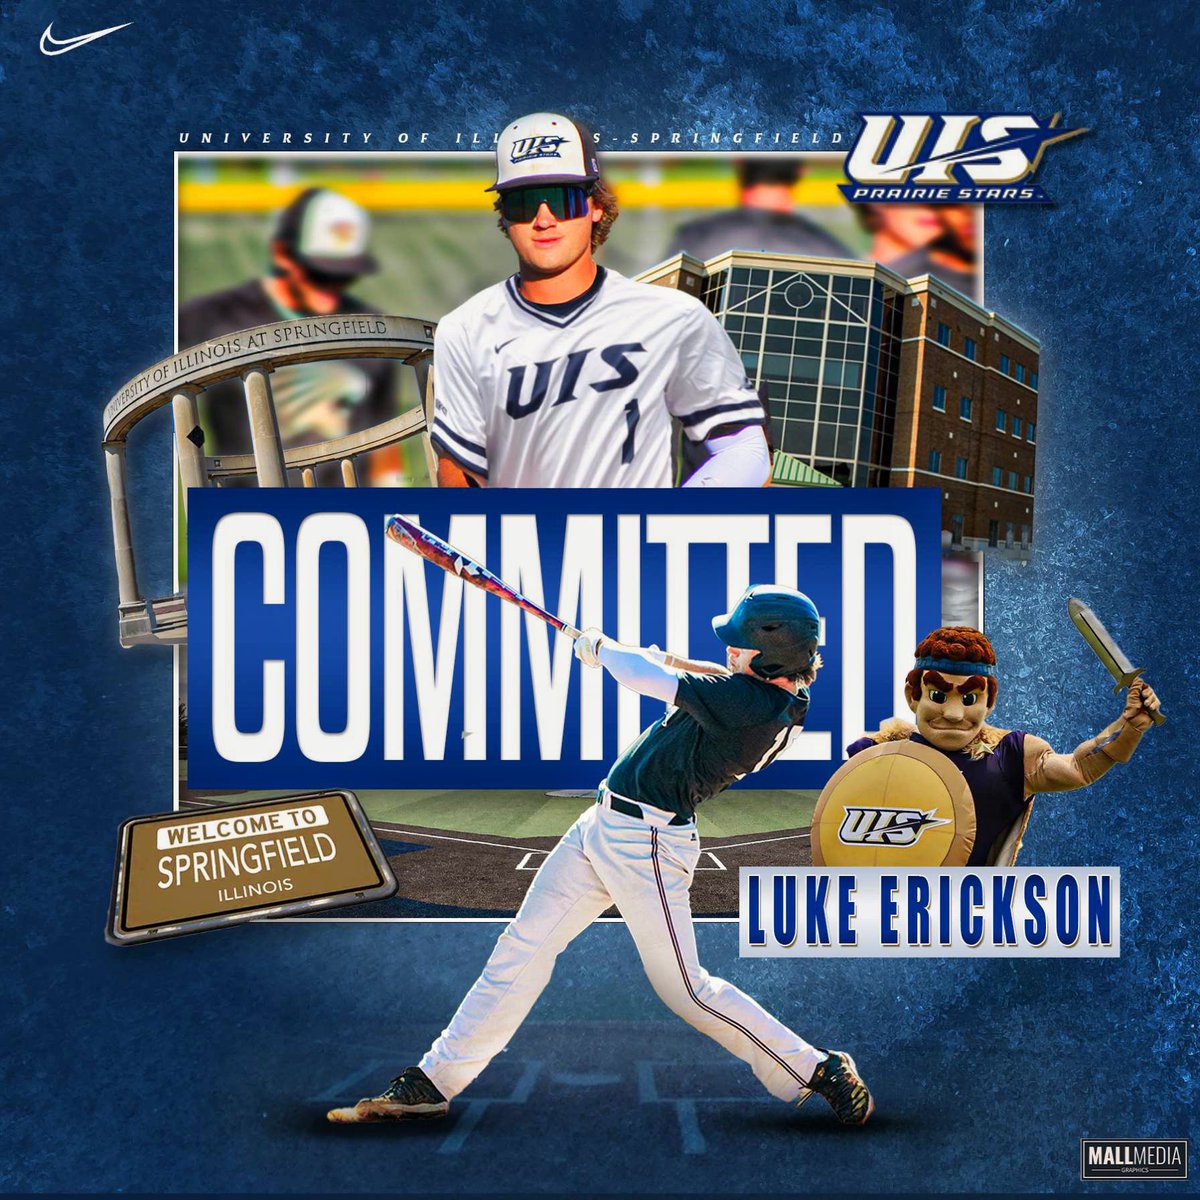 I am excited and blessed to announce that I will be continuing my academic and athletic career at University of Illinois Springfield. I would like to thank God, my family, friends, and coaches for helping me get to this point in my career! @Baseball_UIS @SCCCougarsBsb